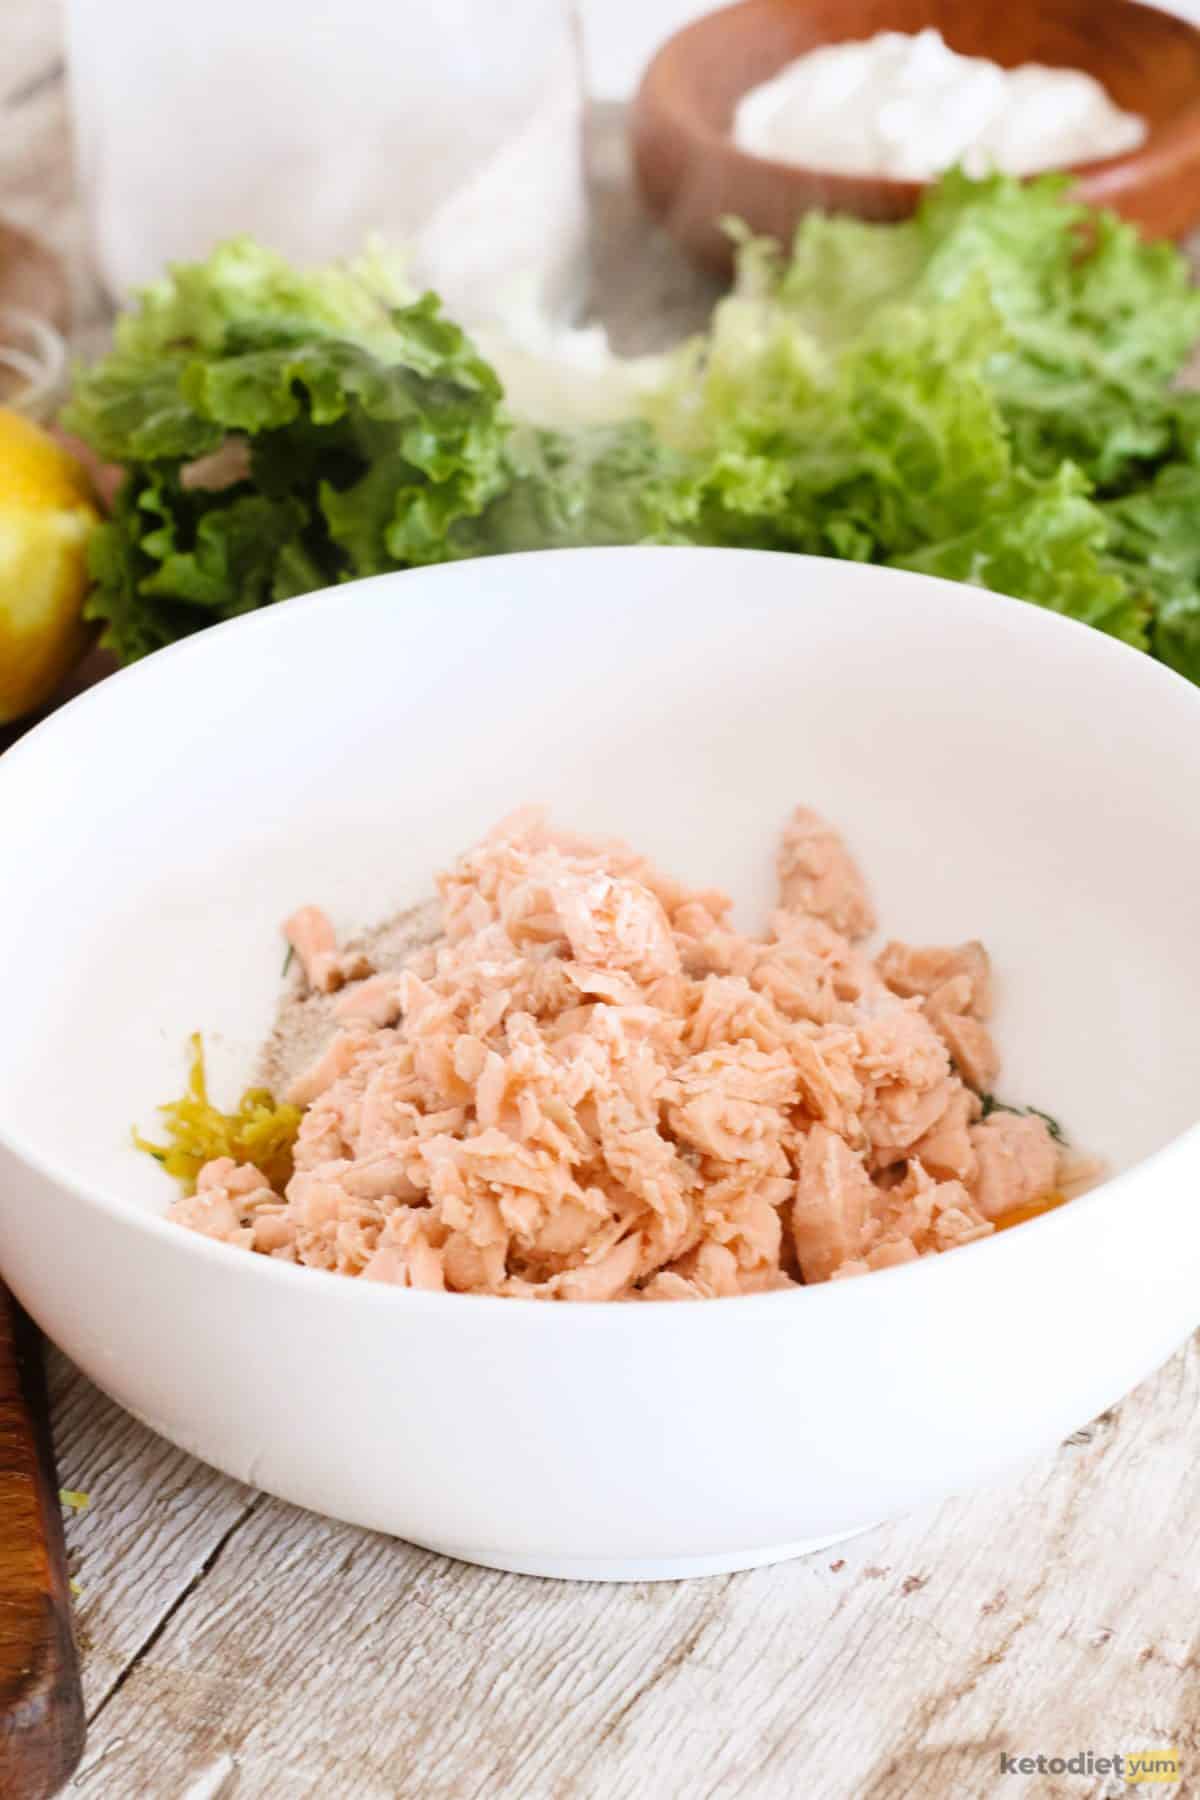 Flaked salmon in a white bowl ready to combine with other ingredients into burgers